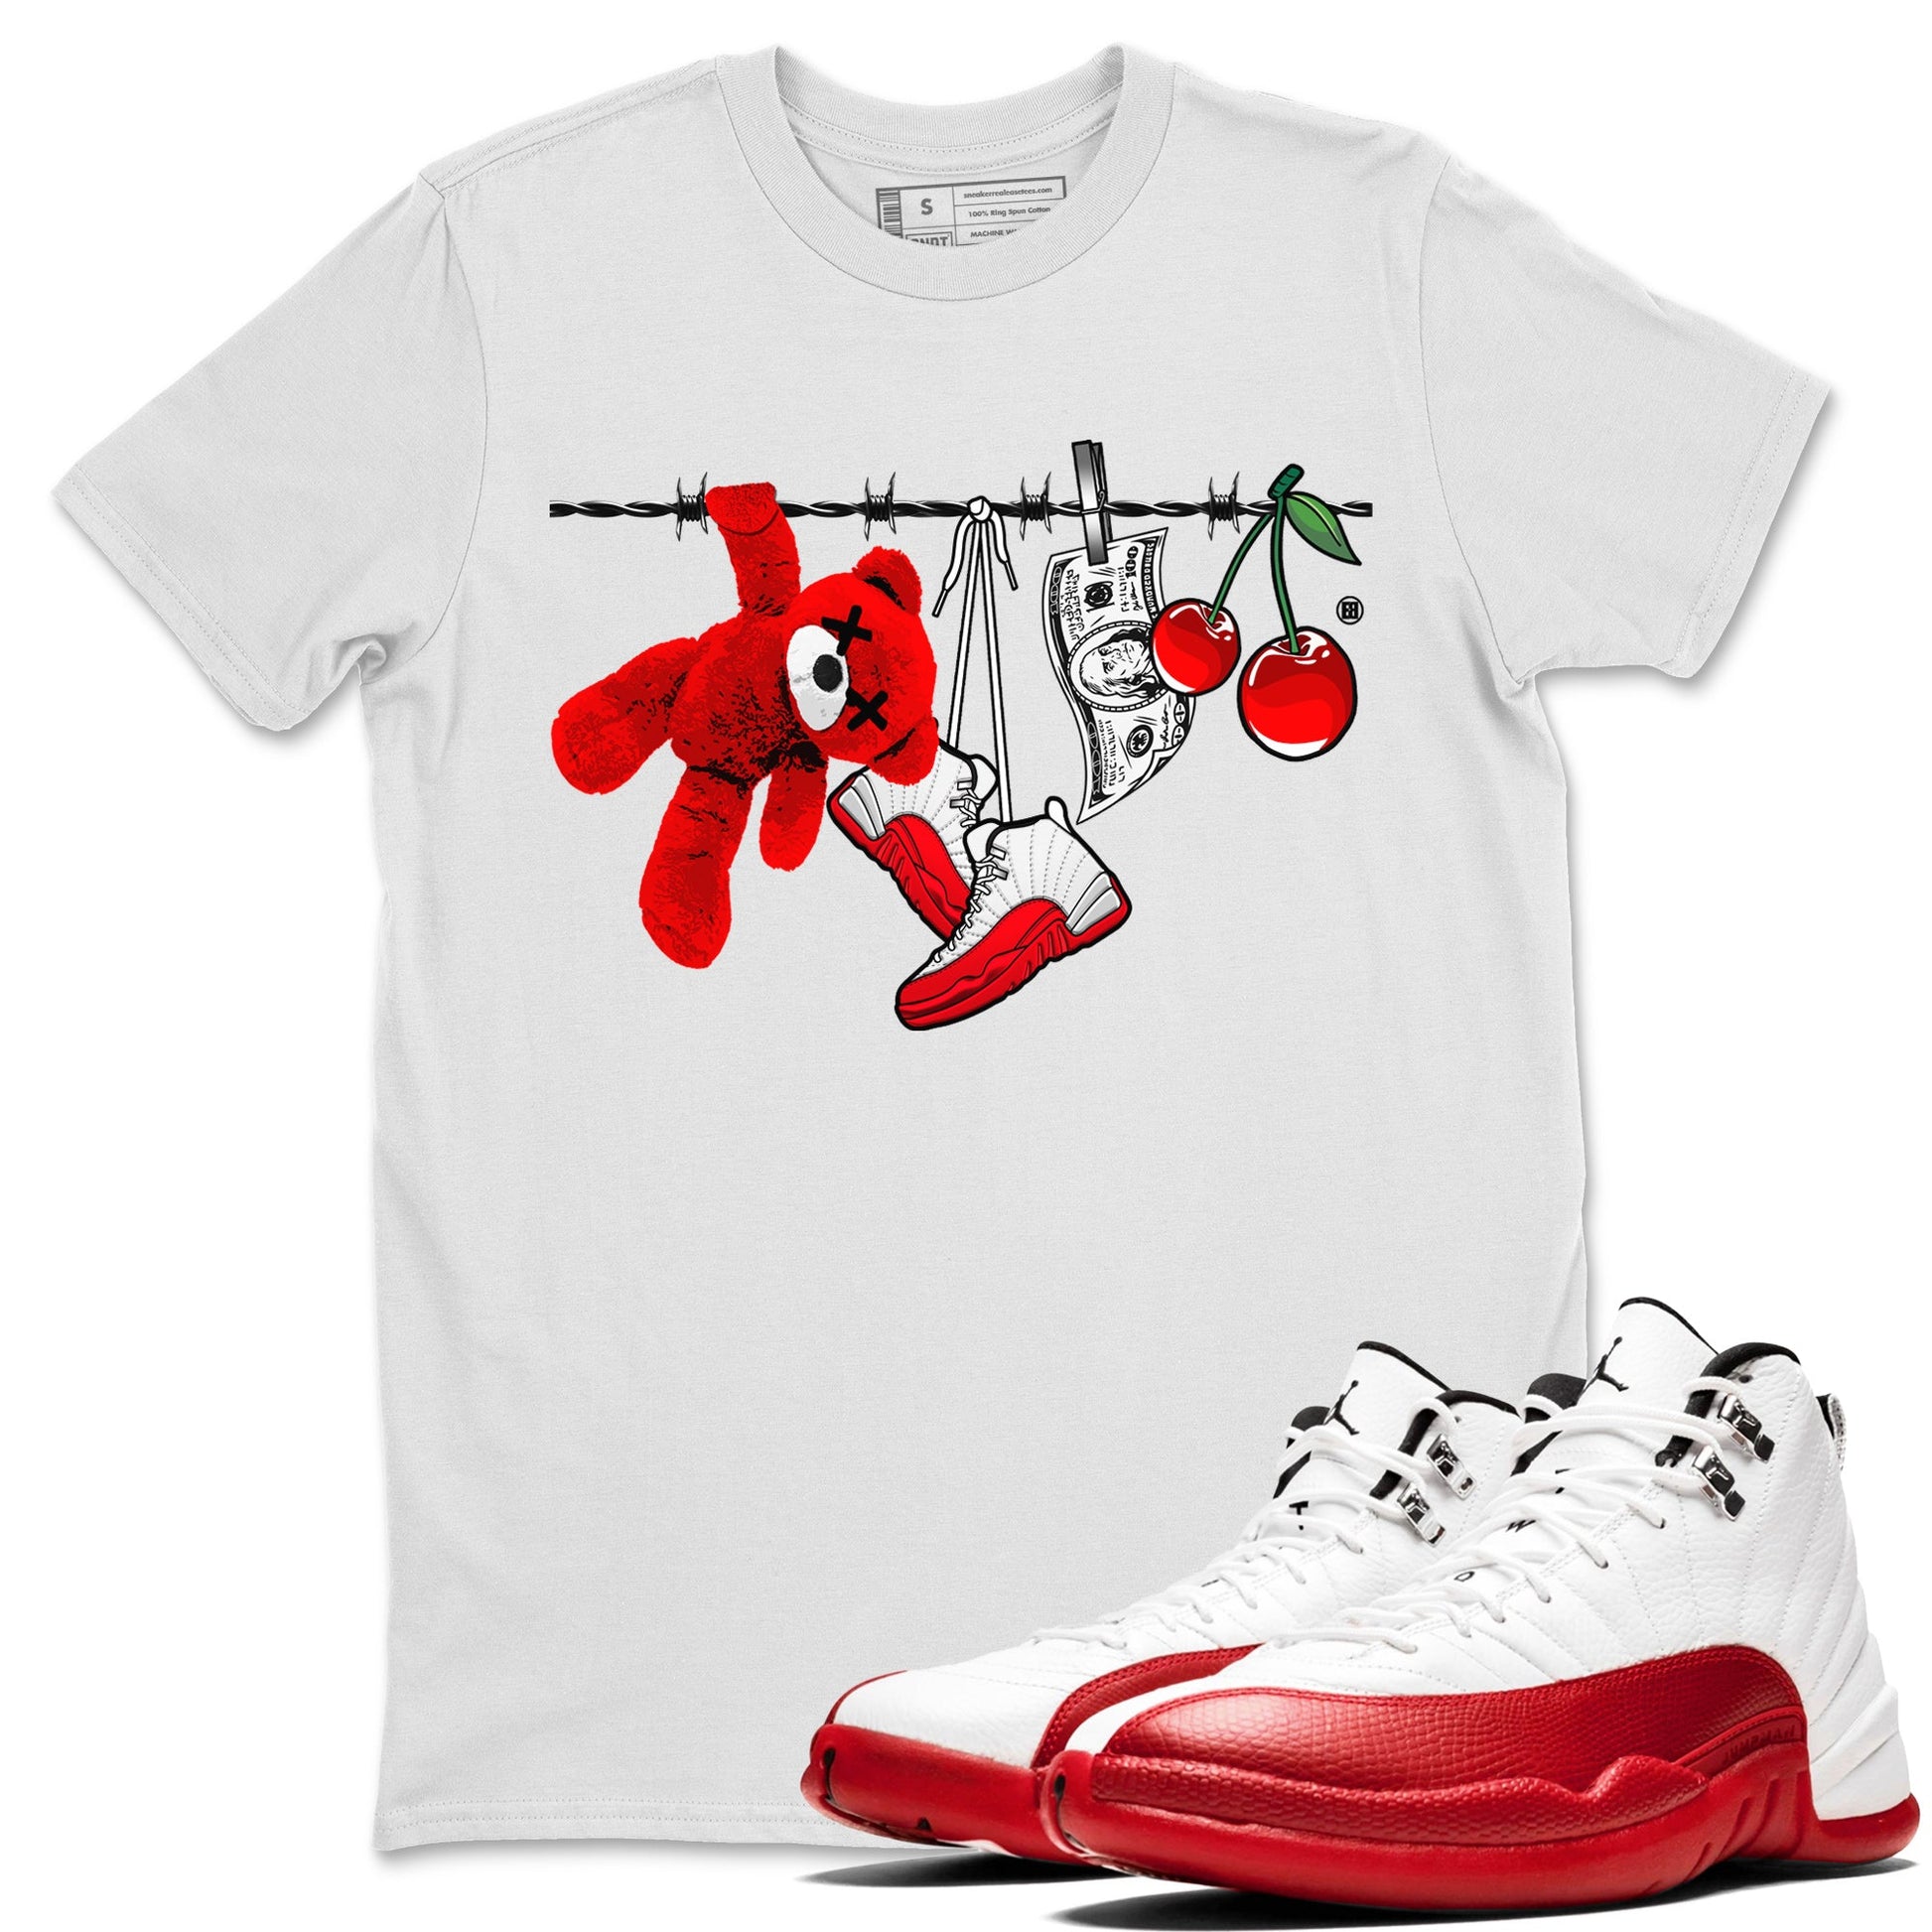 12s Cherry Sneaker Match Tees Clothesline Sneaker Tees Air Jordan 12 Cherry Sneaker Release Tees Unisex Shirts White 1